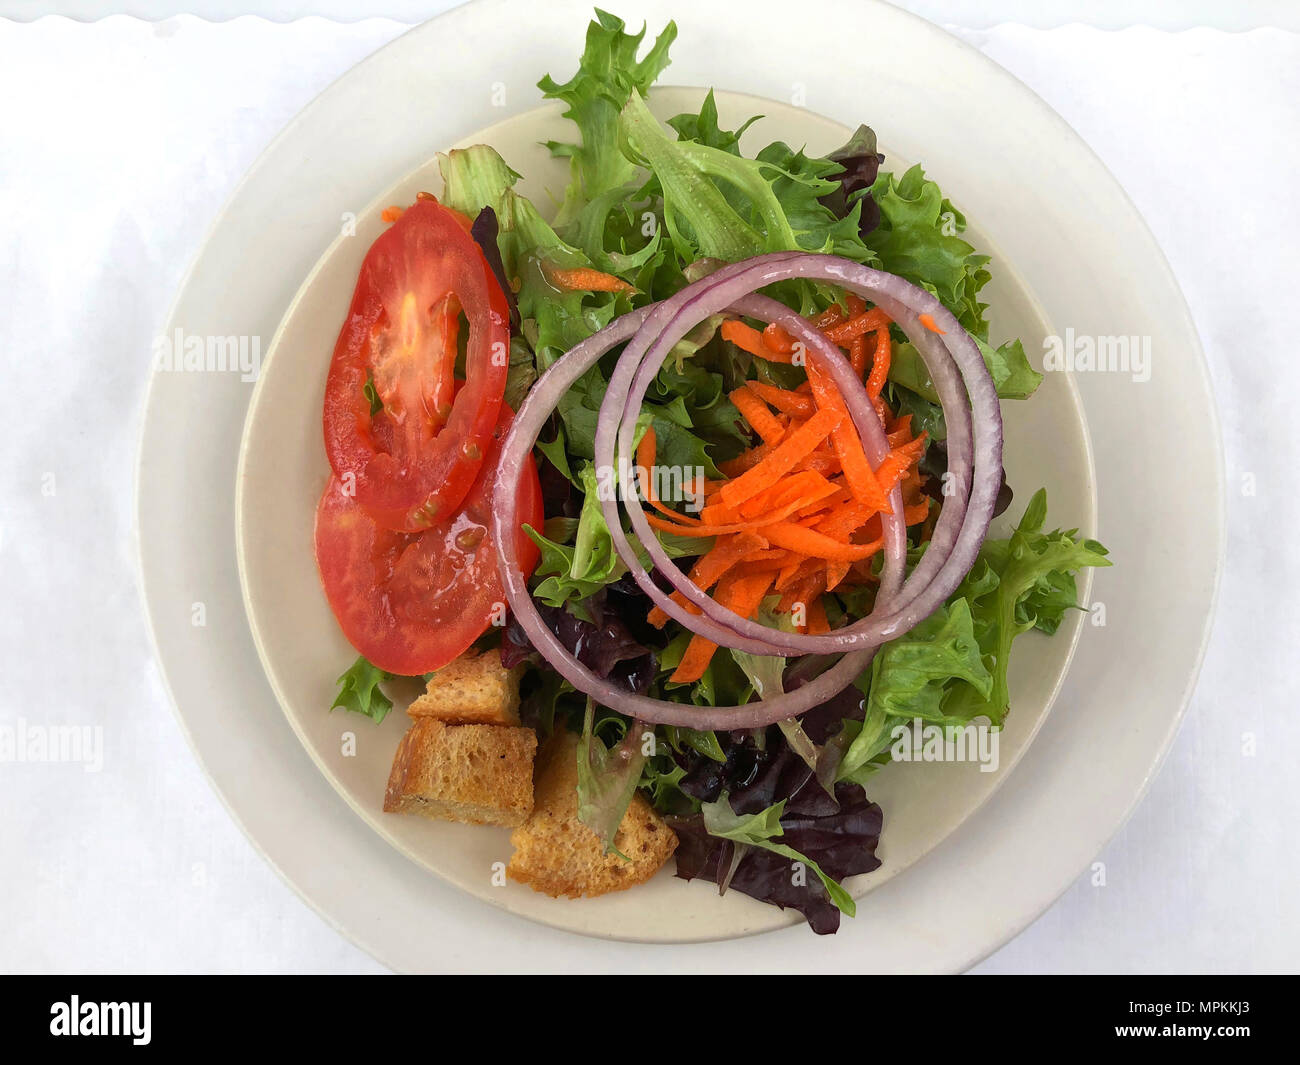 Small lettuce salad on a white plate, grated carrots, onions, tomato and croutons on a white placemat Stock Photo